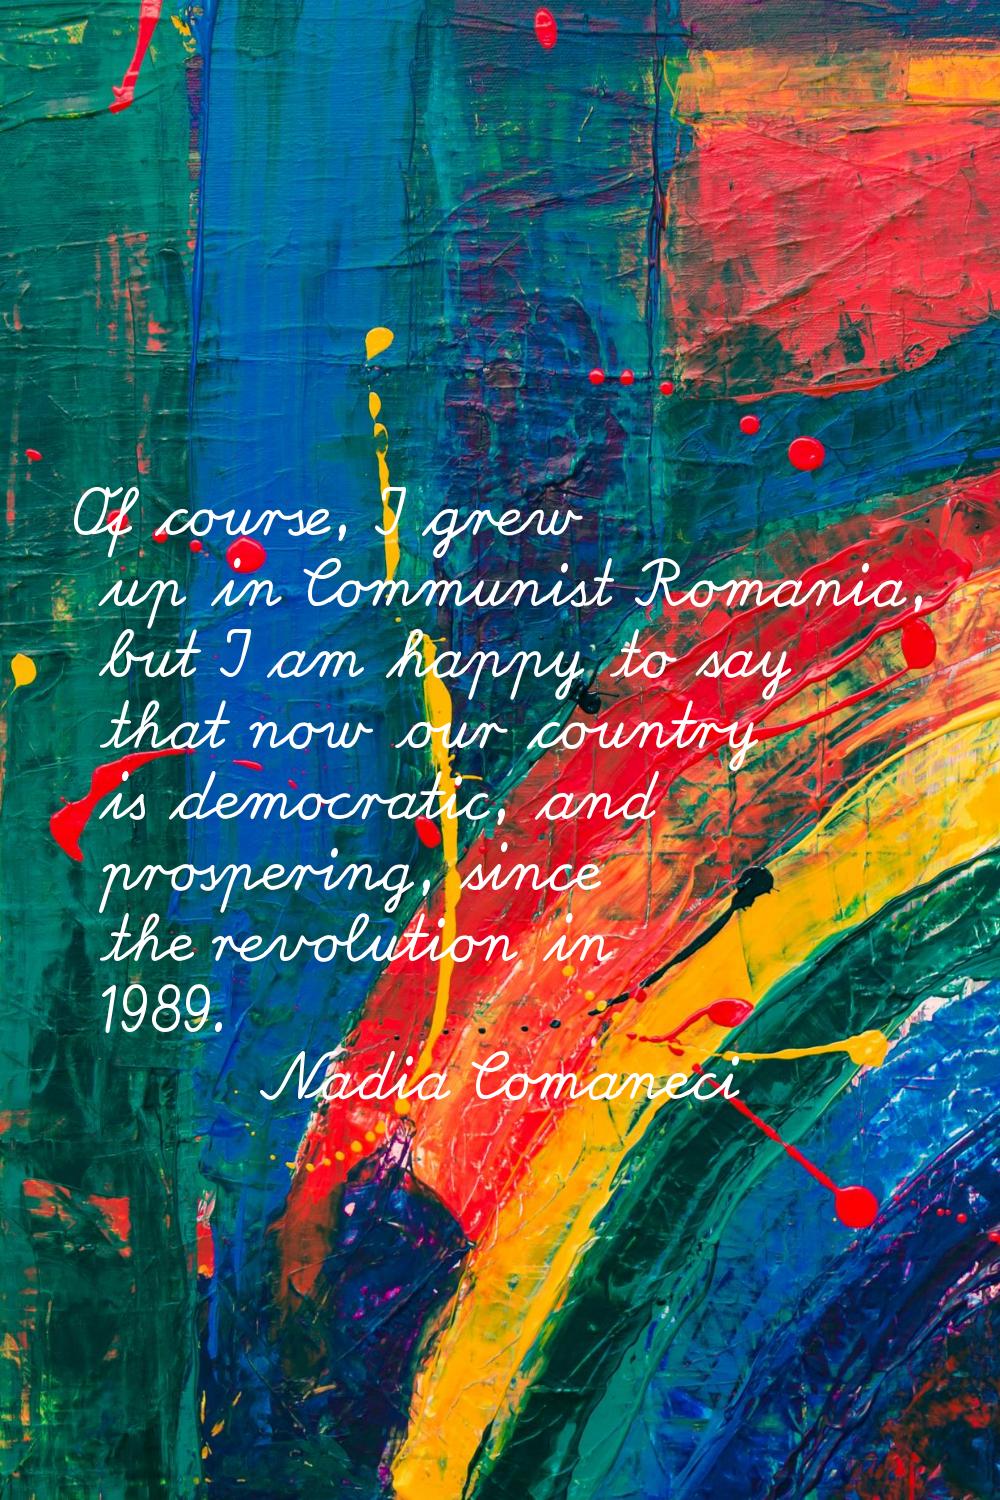 Of course, I grew up in Communist Romania, but I am happy to say that now our country is democratic